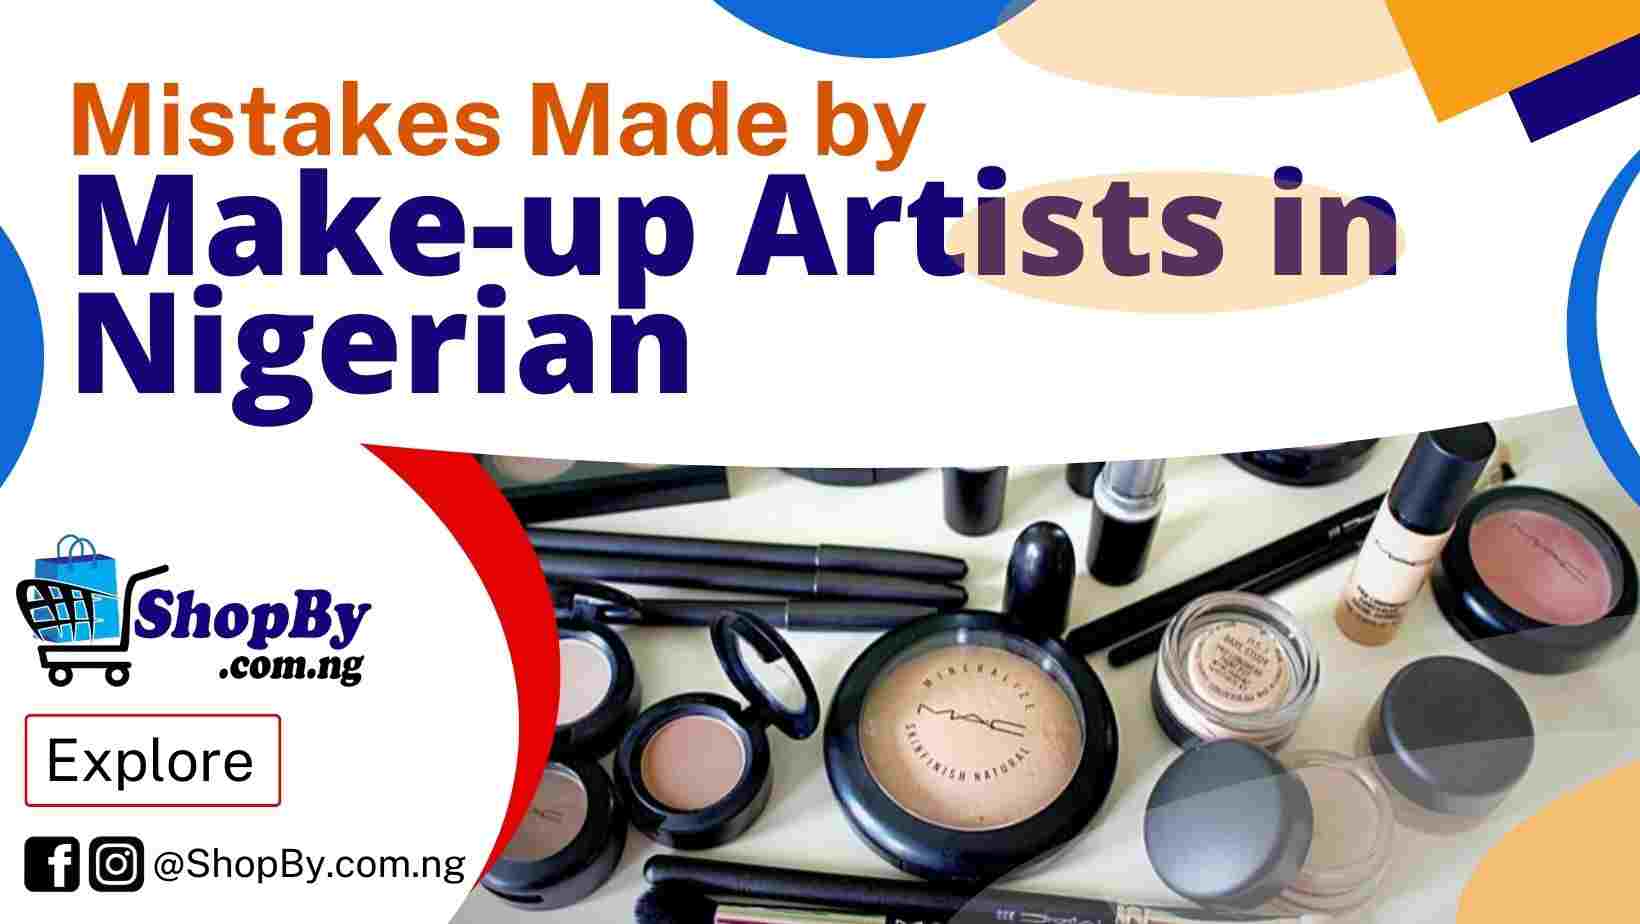 Mistakes Made by Makeup Artists in Nigerian